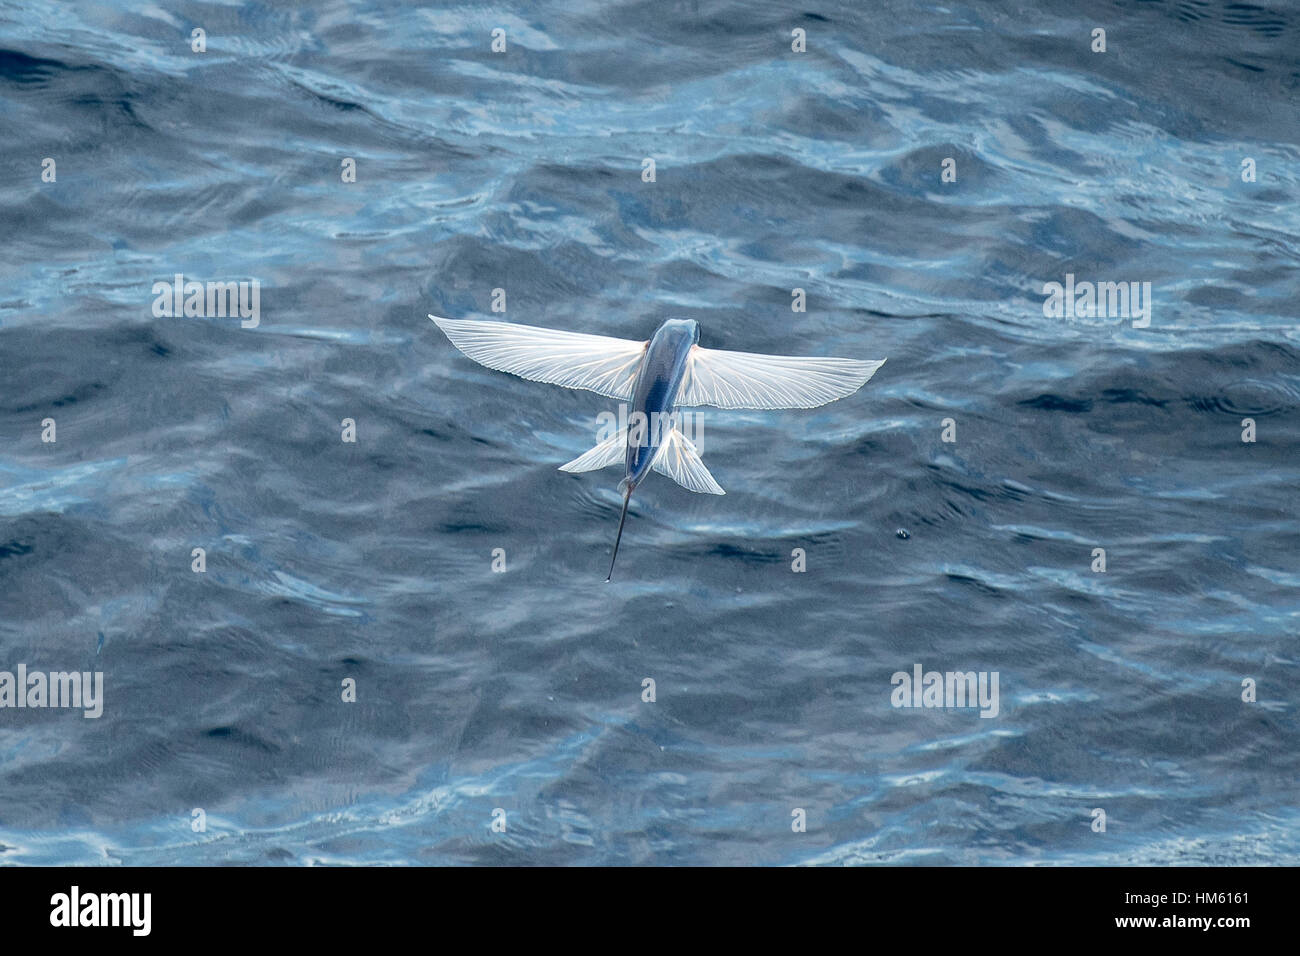 Flying Fish Species in mid air, scientific name unknown, several hundred miles off Mauritania, Africa, Atlantic Ocean. Stock Photo